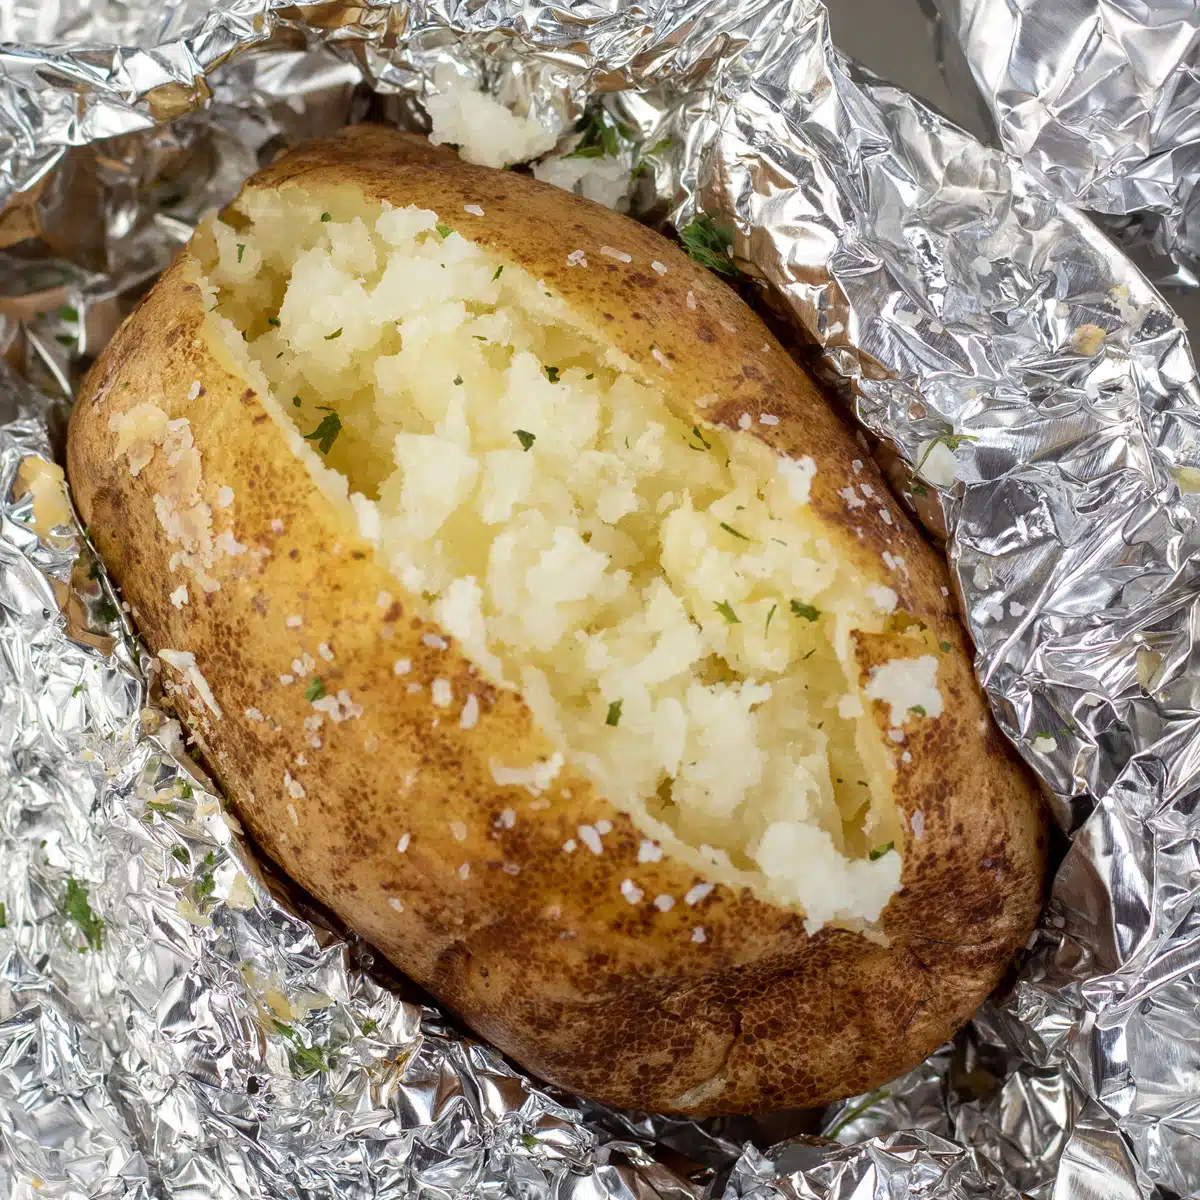 Square image showing slow cooked baked potato.